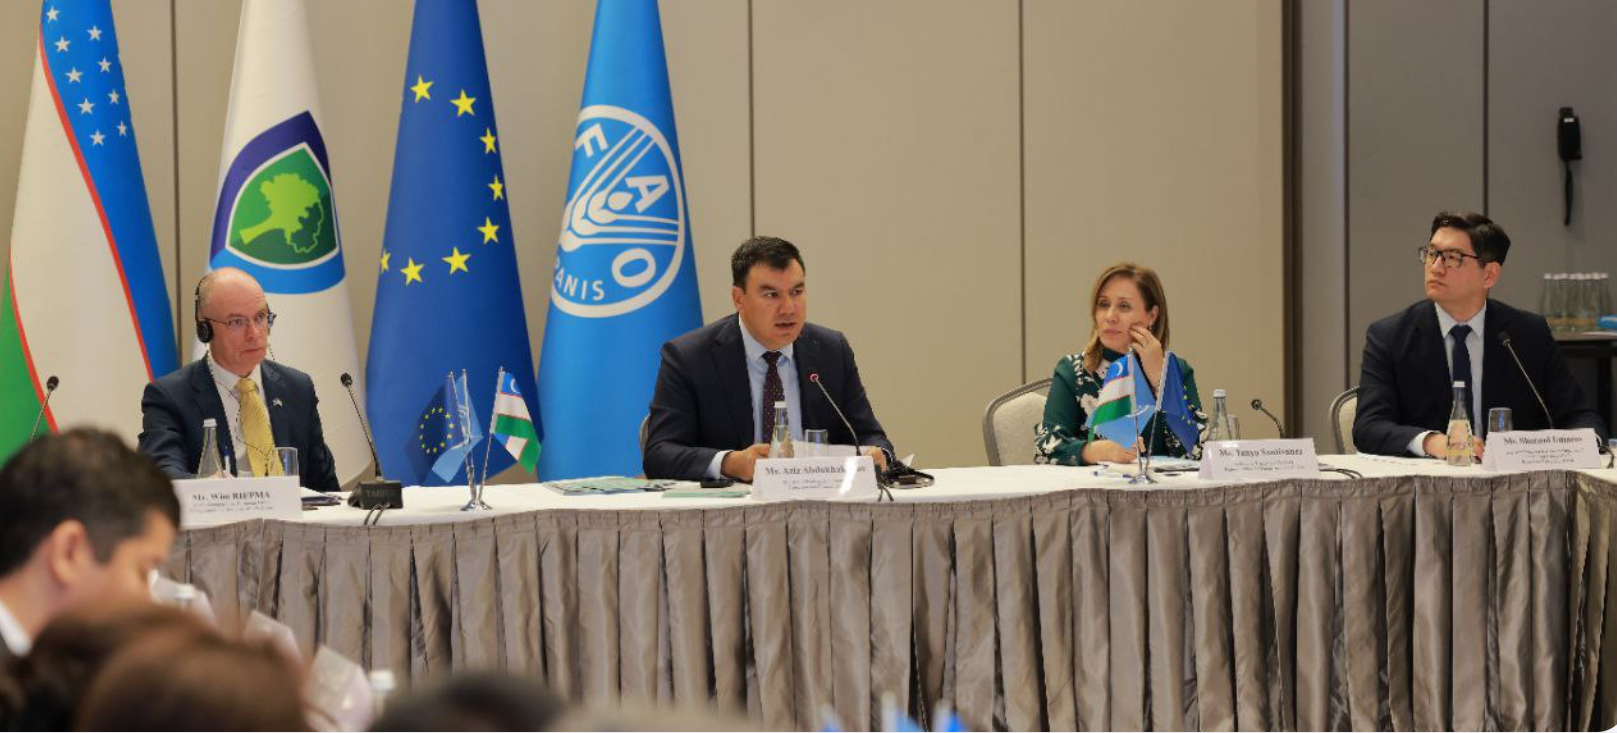 Uzbekistan partners with FAO and EU to pioneer safer agricultural practices